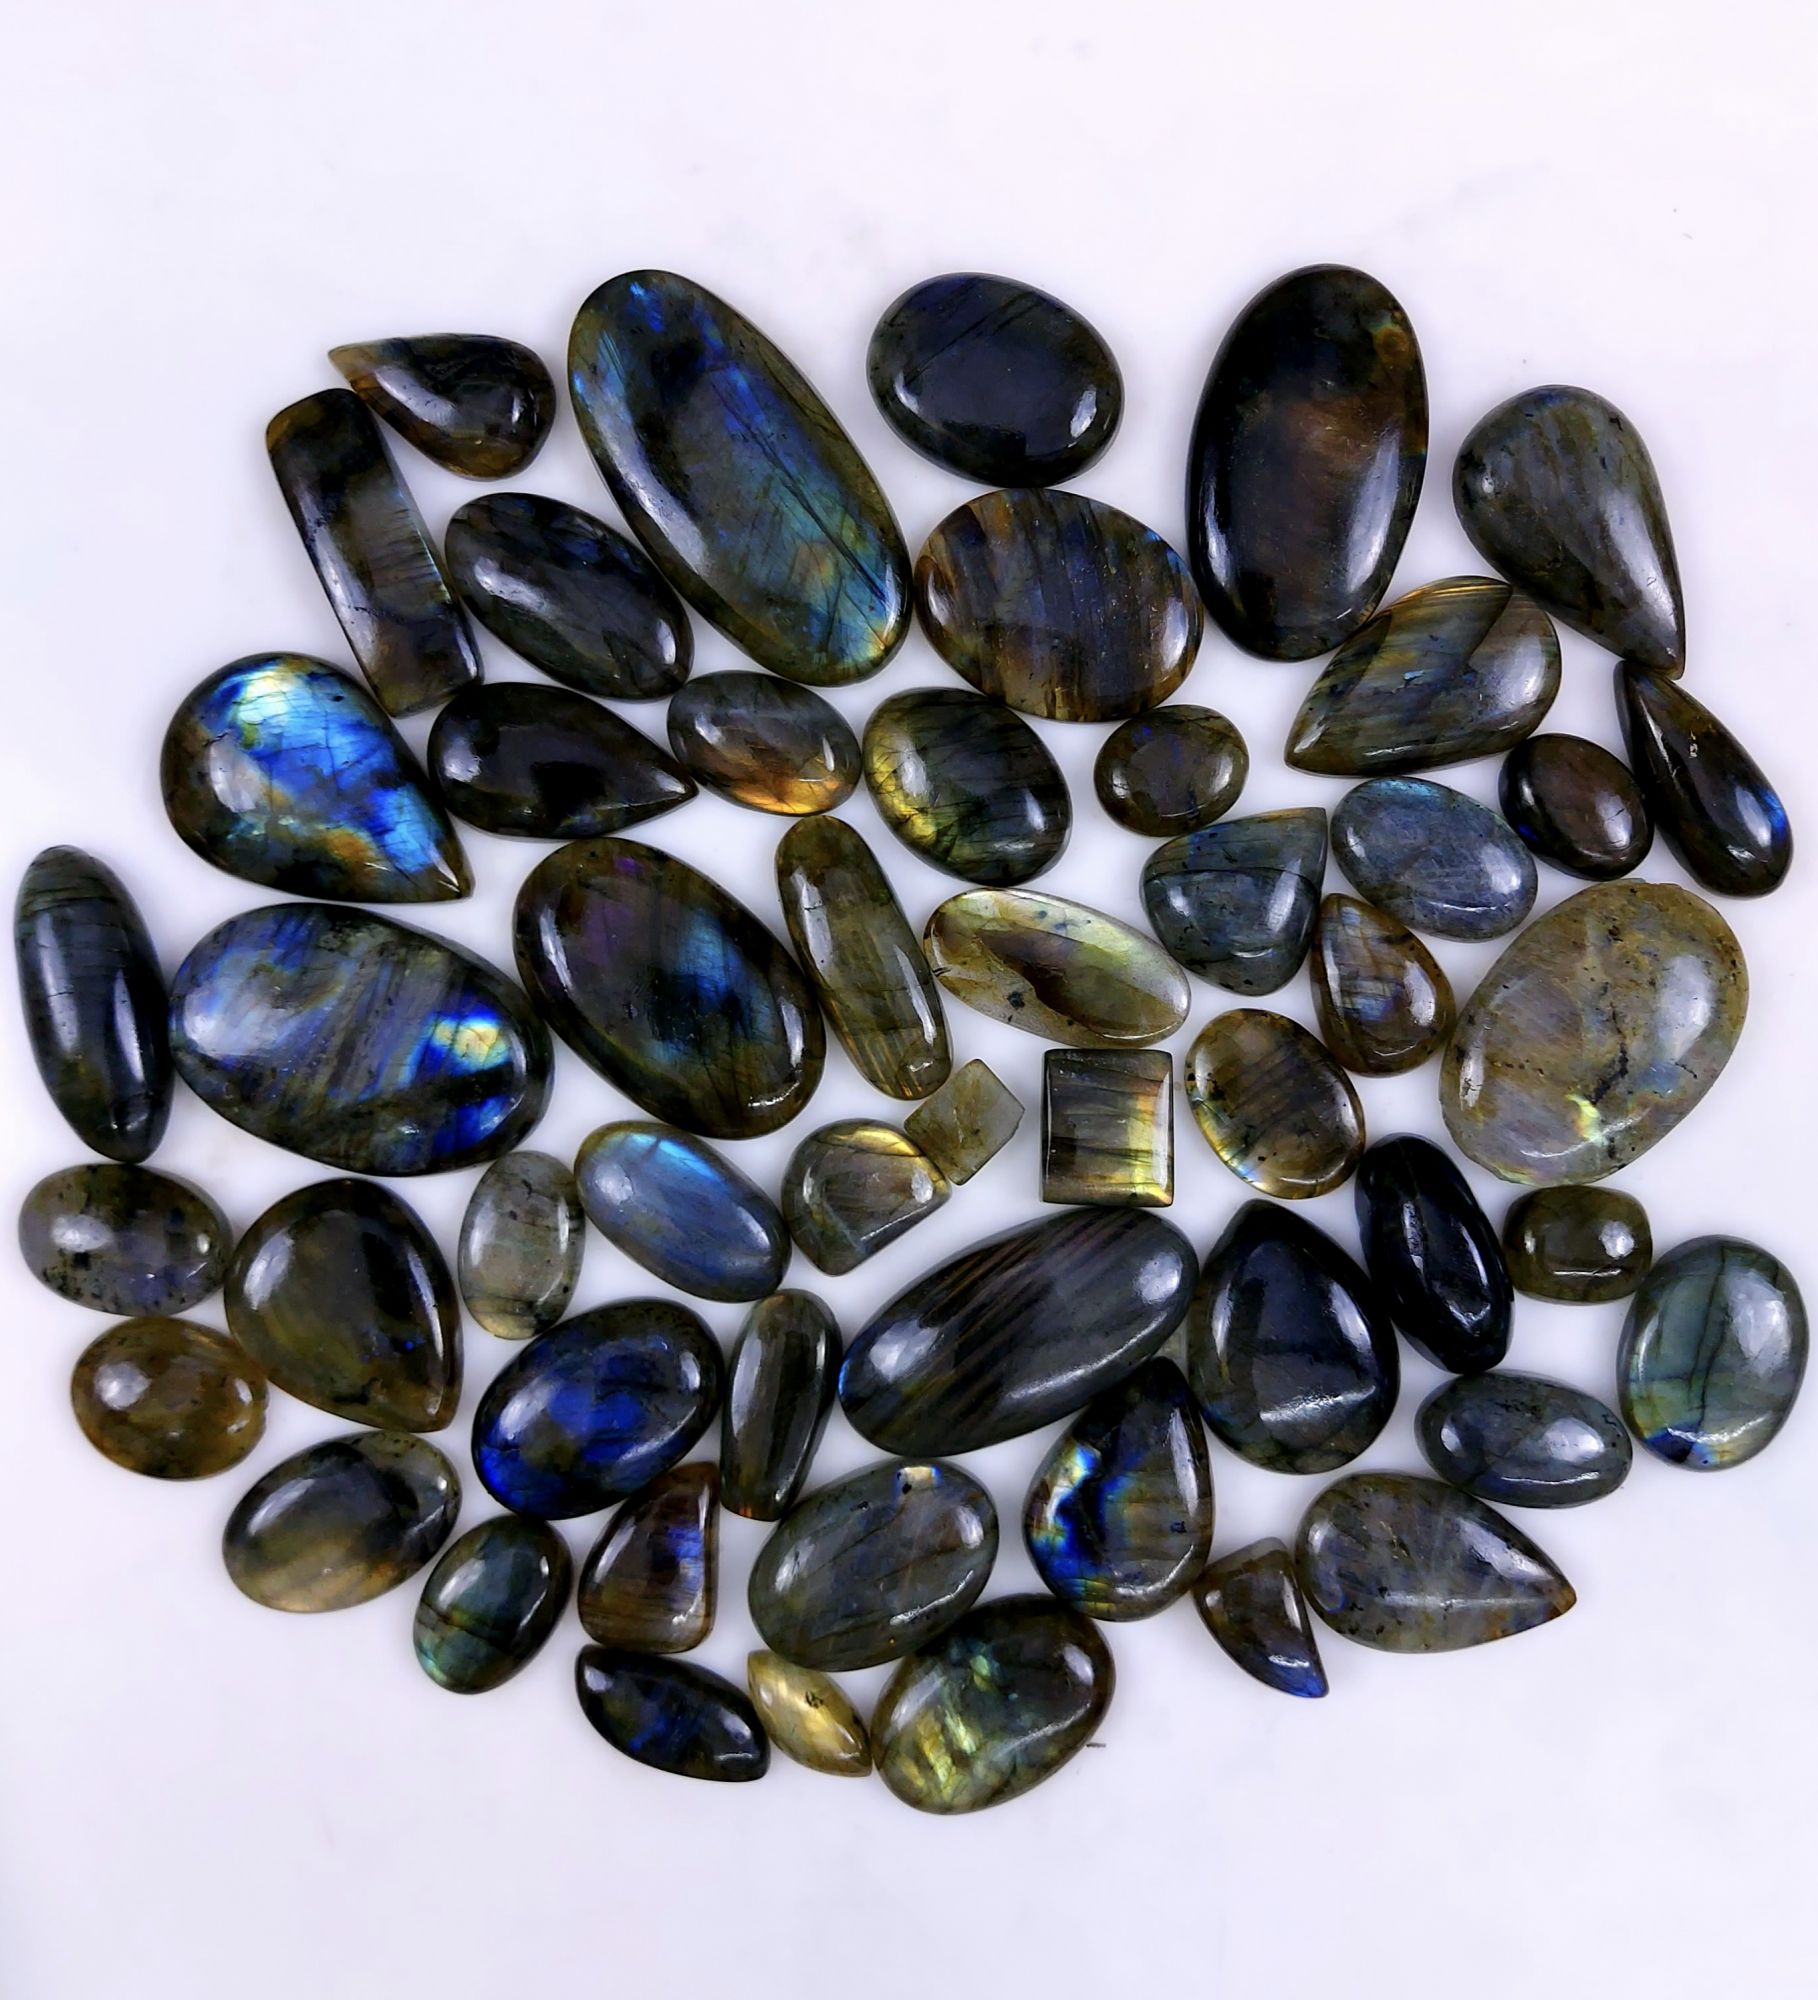 52pc 1683Cts Labradorite Cabochon Multifire Healing Crystal For Jewelry Supplies, Labradorite Necklace Handmade Wire Wrapped Gemstone Pendant 52x26 18x10mm#6382